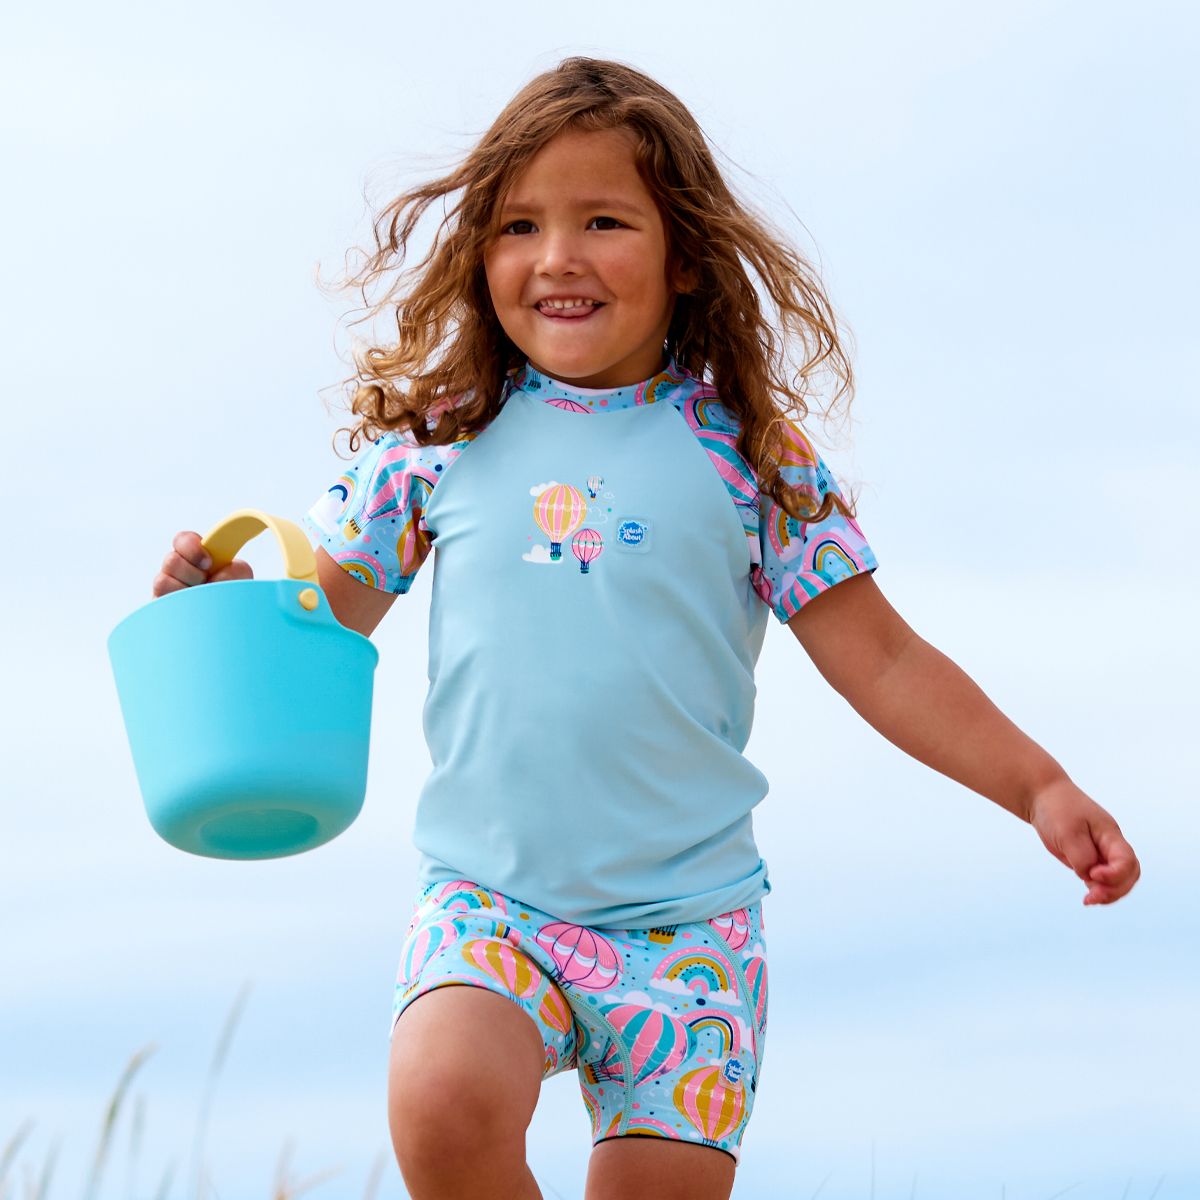 Lifestyle image of child wearing neoprene swim shorts in baby blue with pink waist and hot air balloons themed print, including clouds and rainbows. 